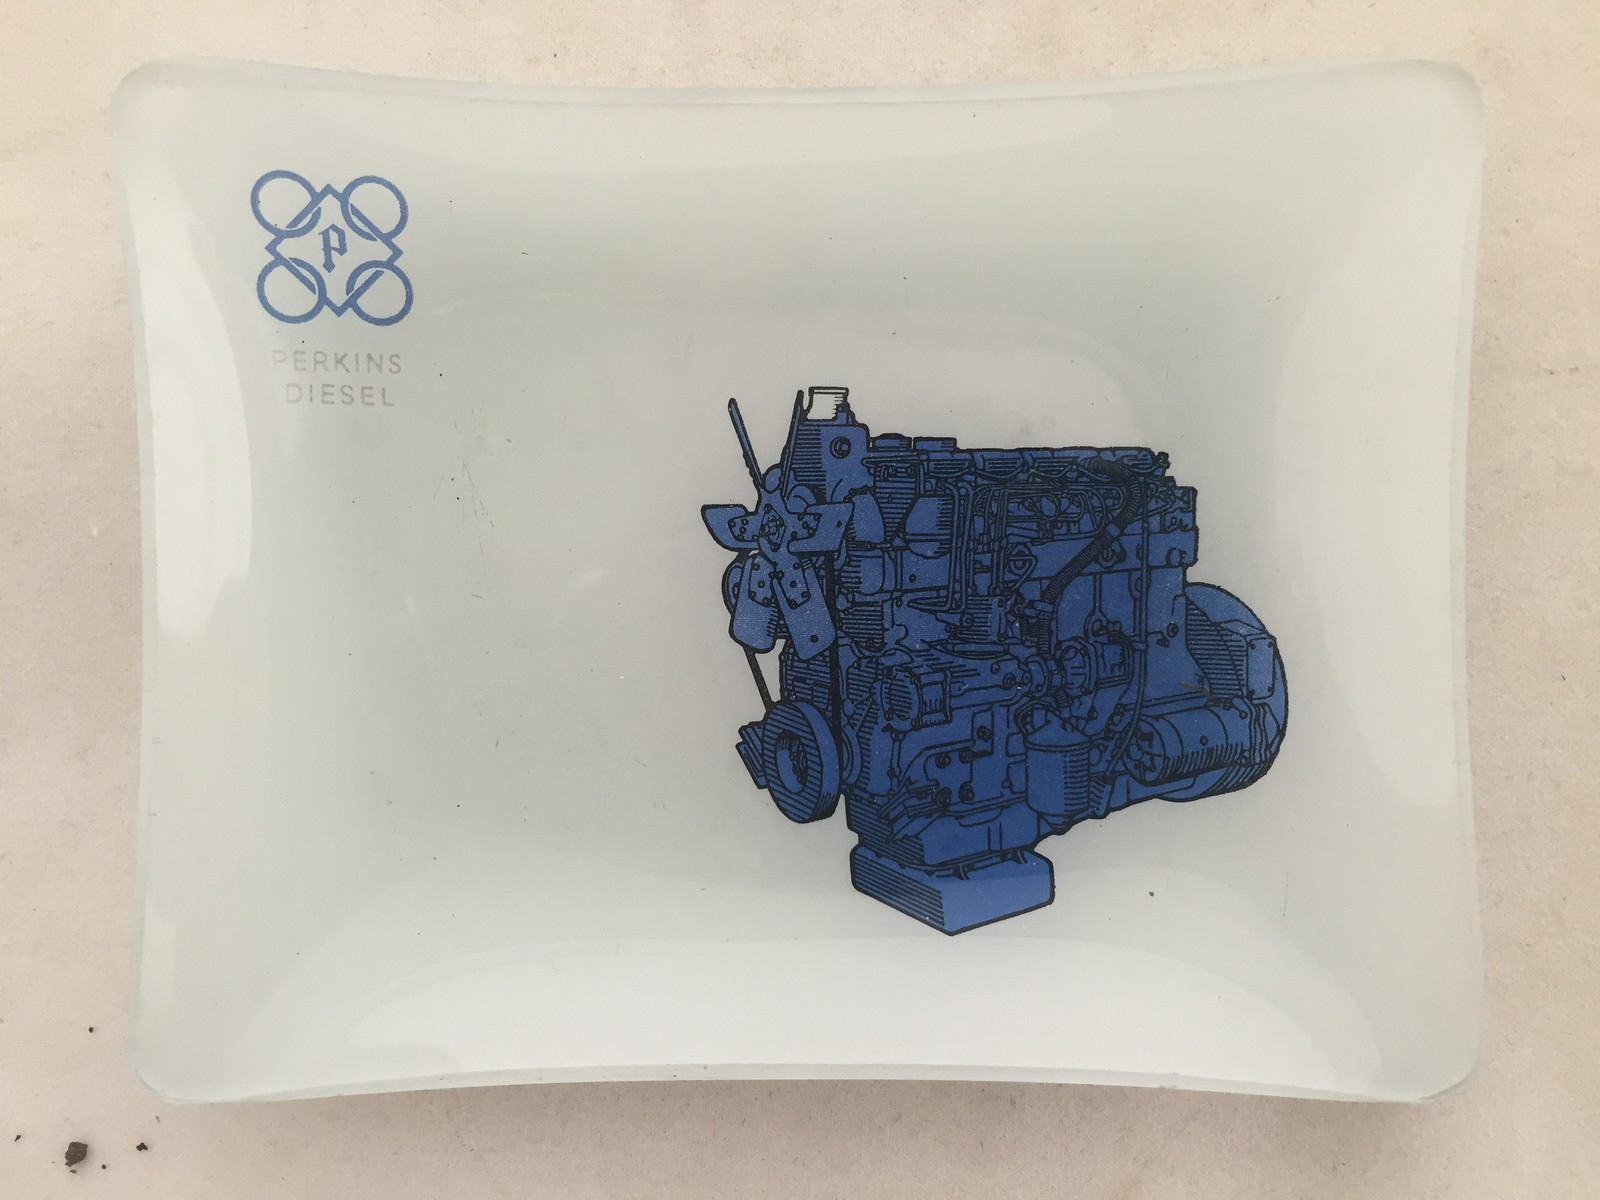 A Perkins Diesel opaque glass trinket dish with pictorial design depicting an engine.